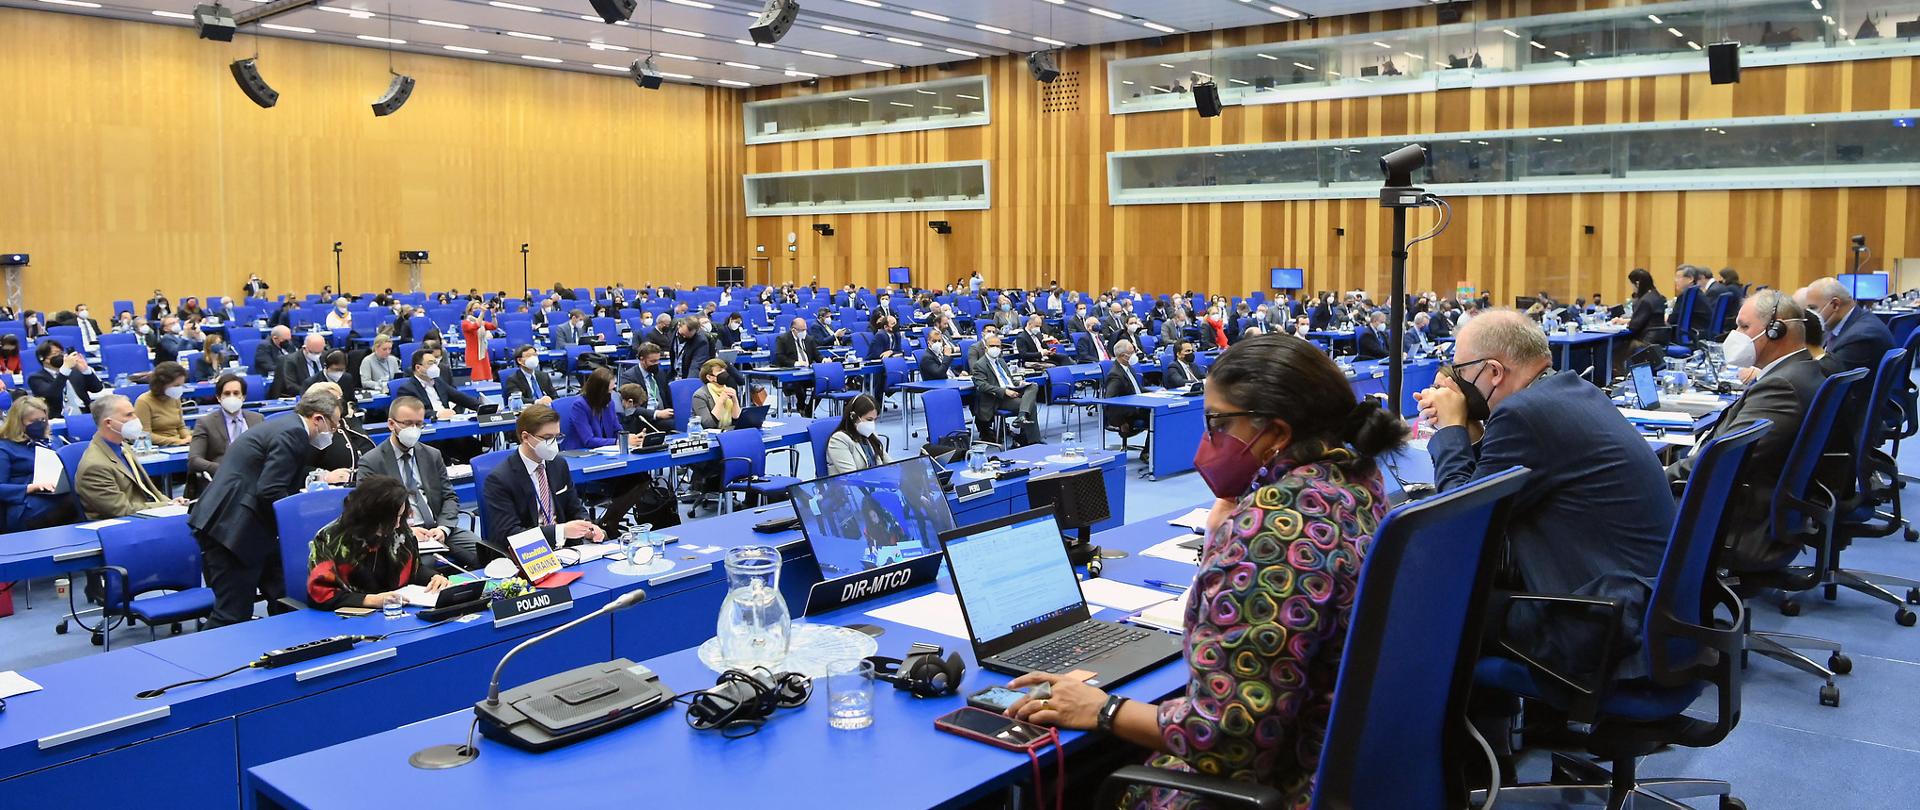 The IAEA 1611th Board of Governors meeting on the Situation in Ukraine held at the Agency headquarters in Vienna, Austria. 2 March 2022